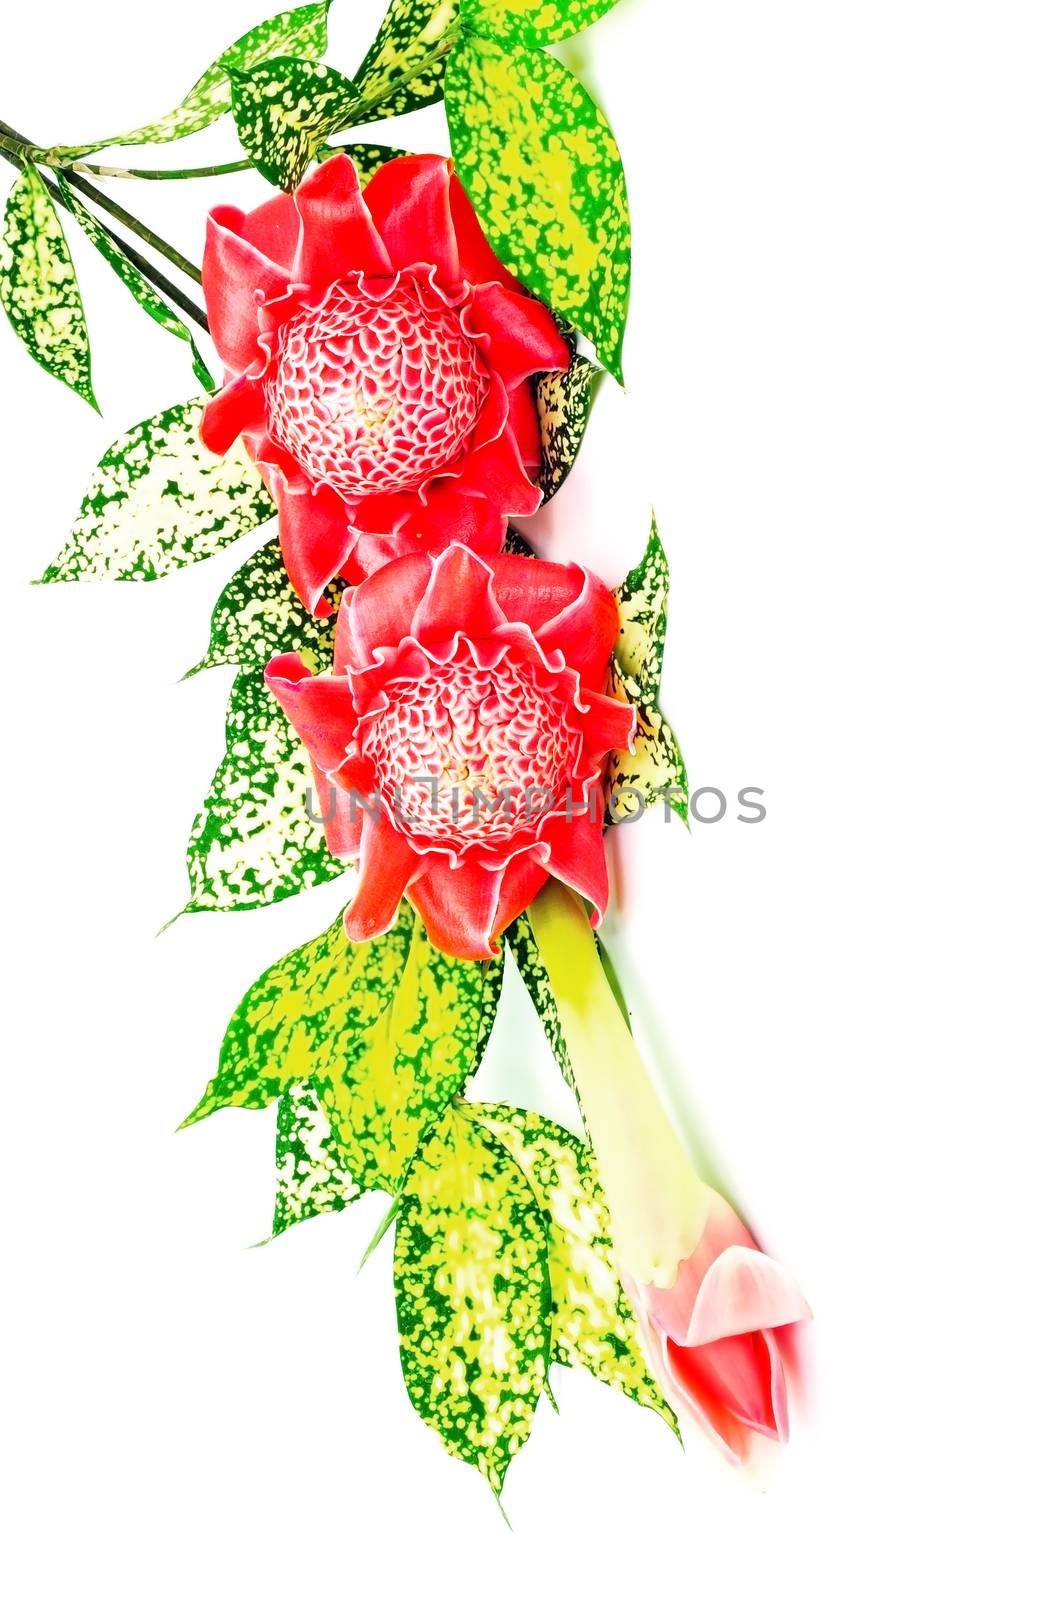 Tropical red Torch Ginger (Etlingera elatior) isolated on a white background with the green leaves 